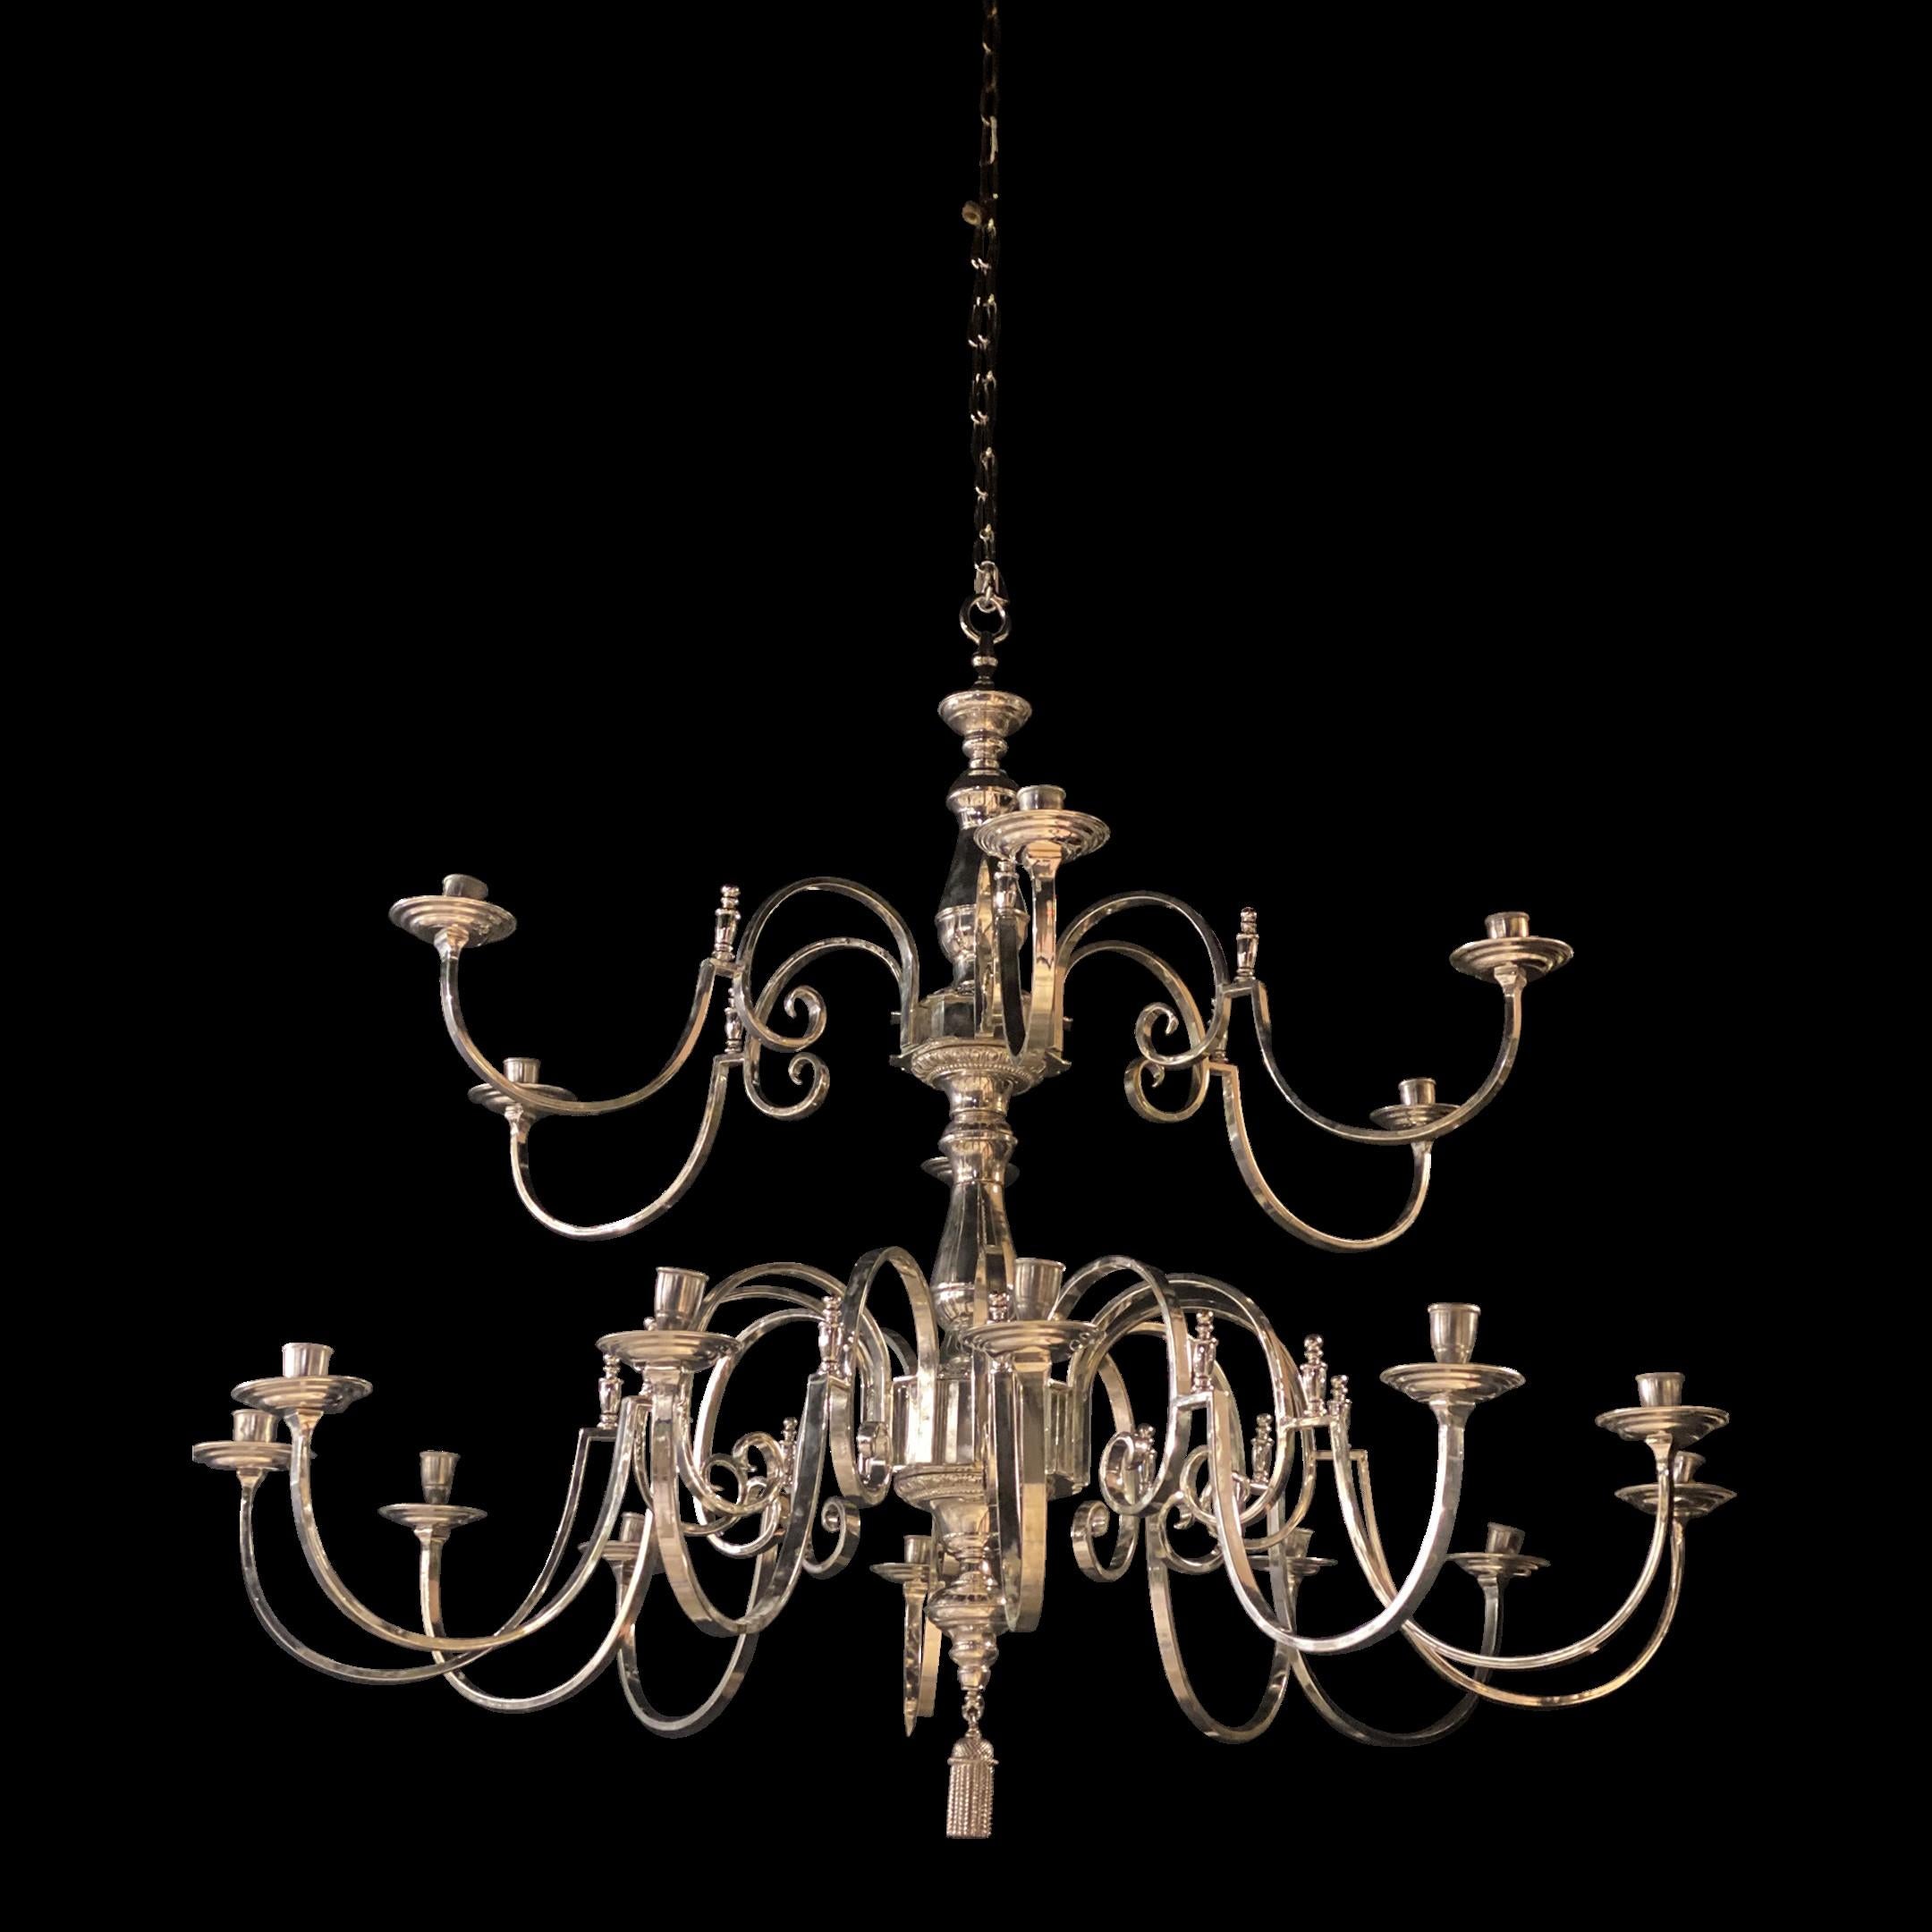 Silvered 1930's English Silver Plated Chandelier with 18 lights For Sale